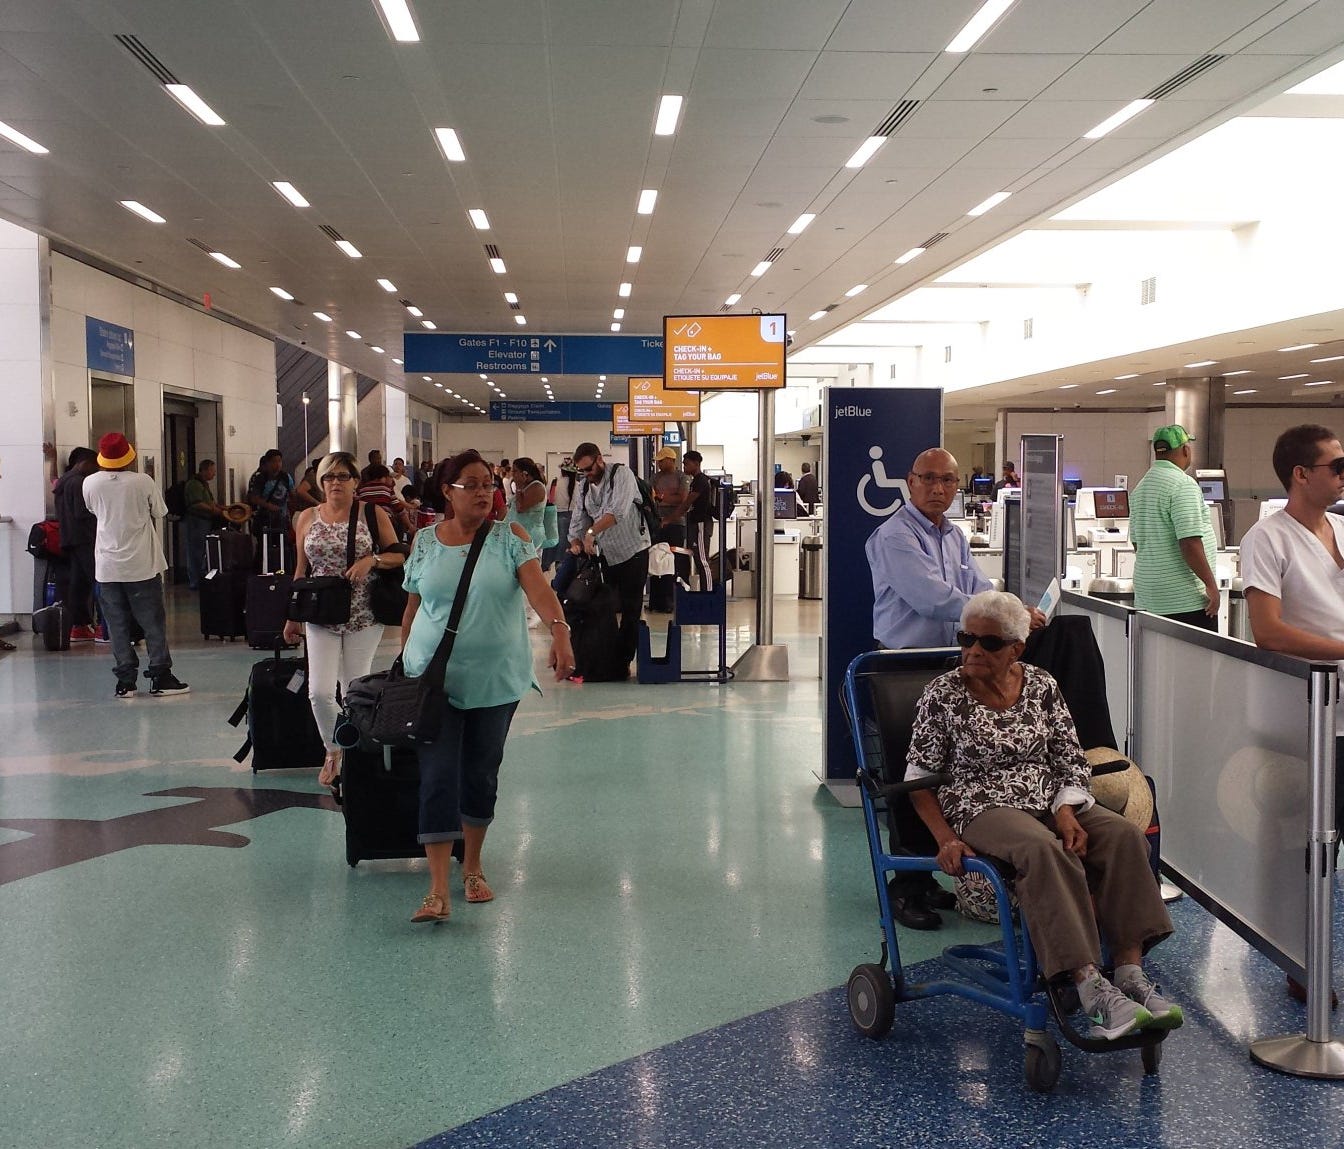 This photo, shared by the Fort Lauderdale airport, shows passenges moving through the terminals there on Tuesday, Sept. 12, 2017.